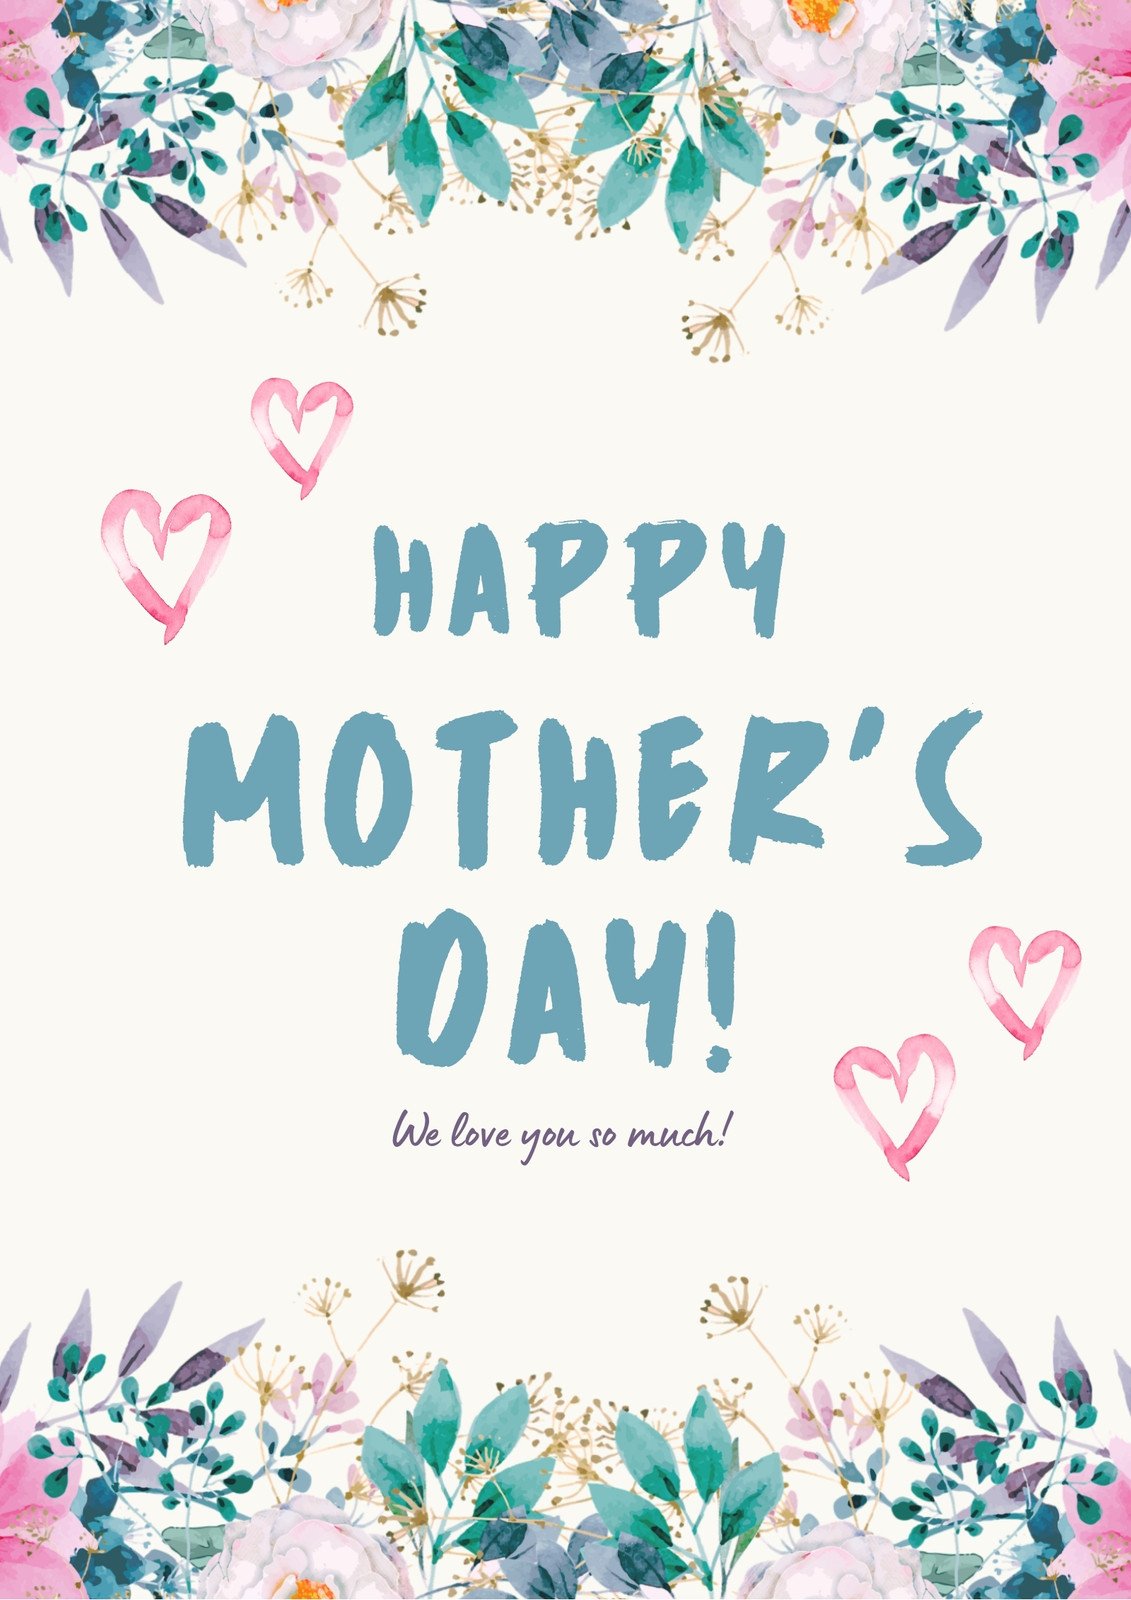 https://marketplace.canva.com/EAFcv2ZvX1k/1/0/1131w/canva-green-and-pink-floral-watercolor-happy-mothers-day-greeting-poster-st9HWCqSgGc.jpg